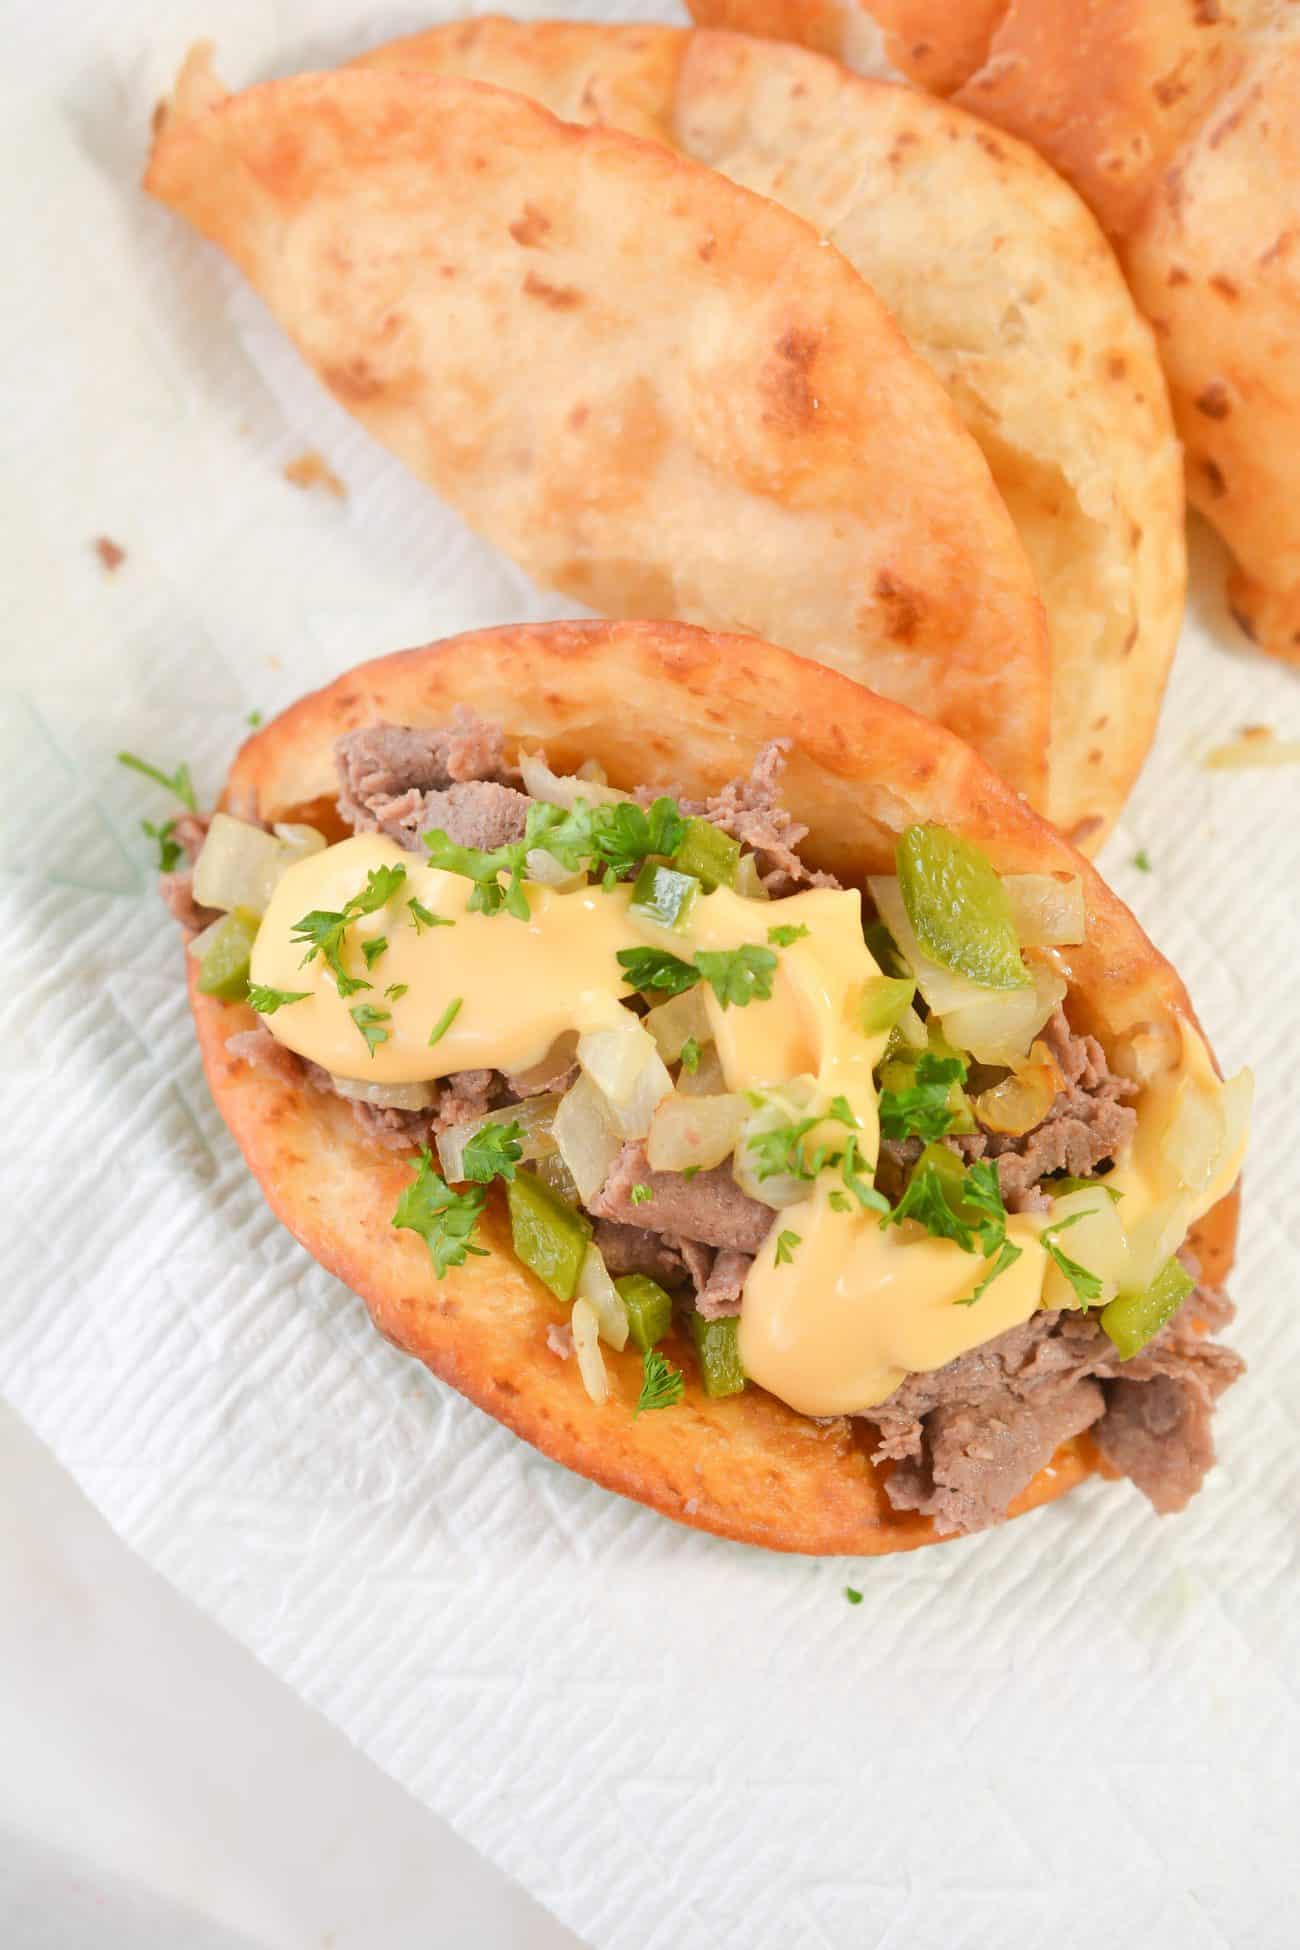 Philly Cheesesteak Tacos